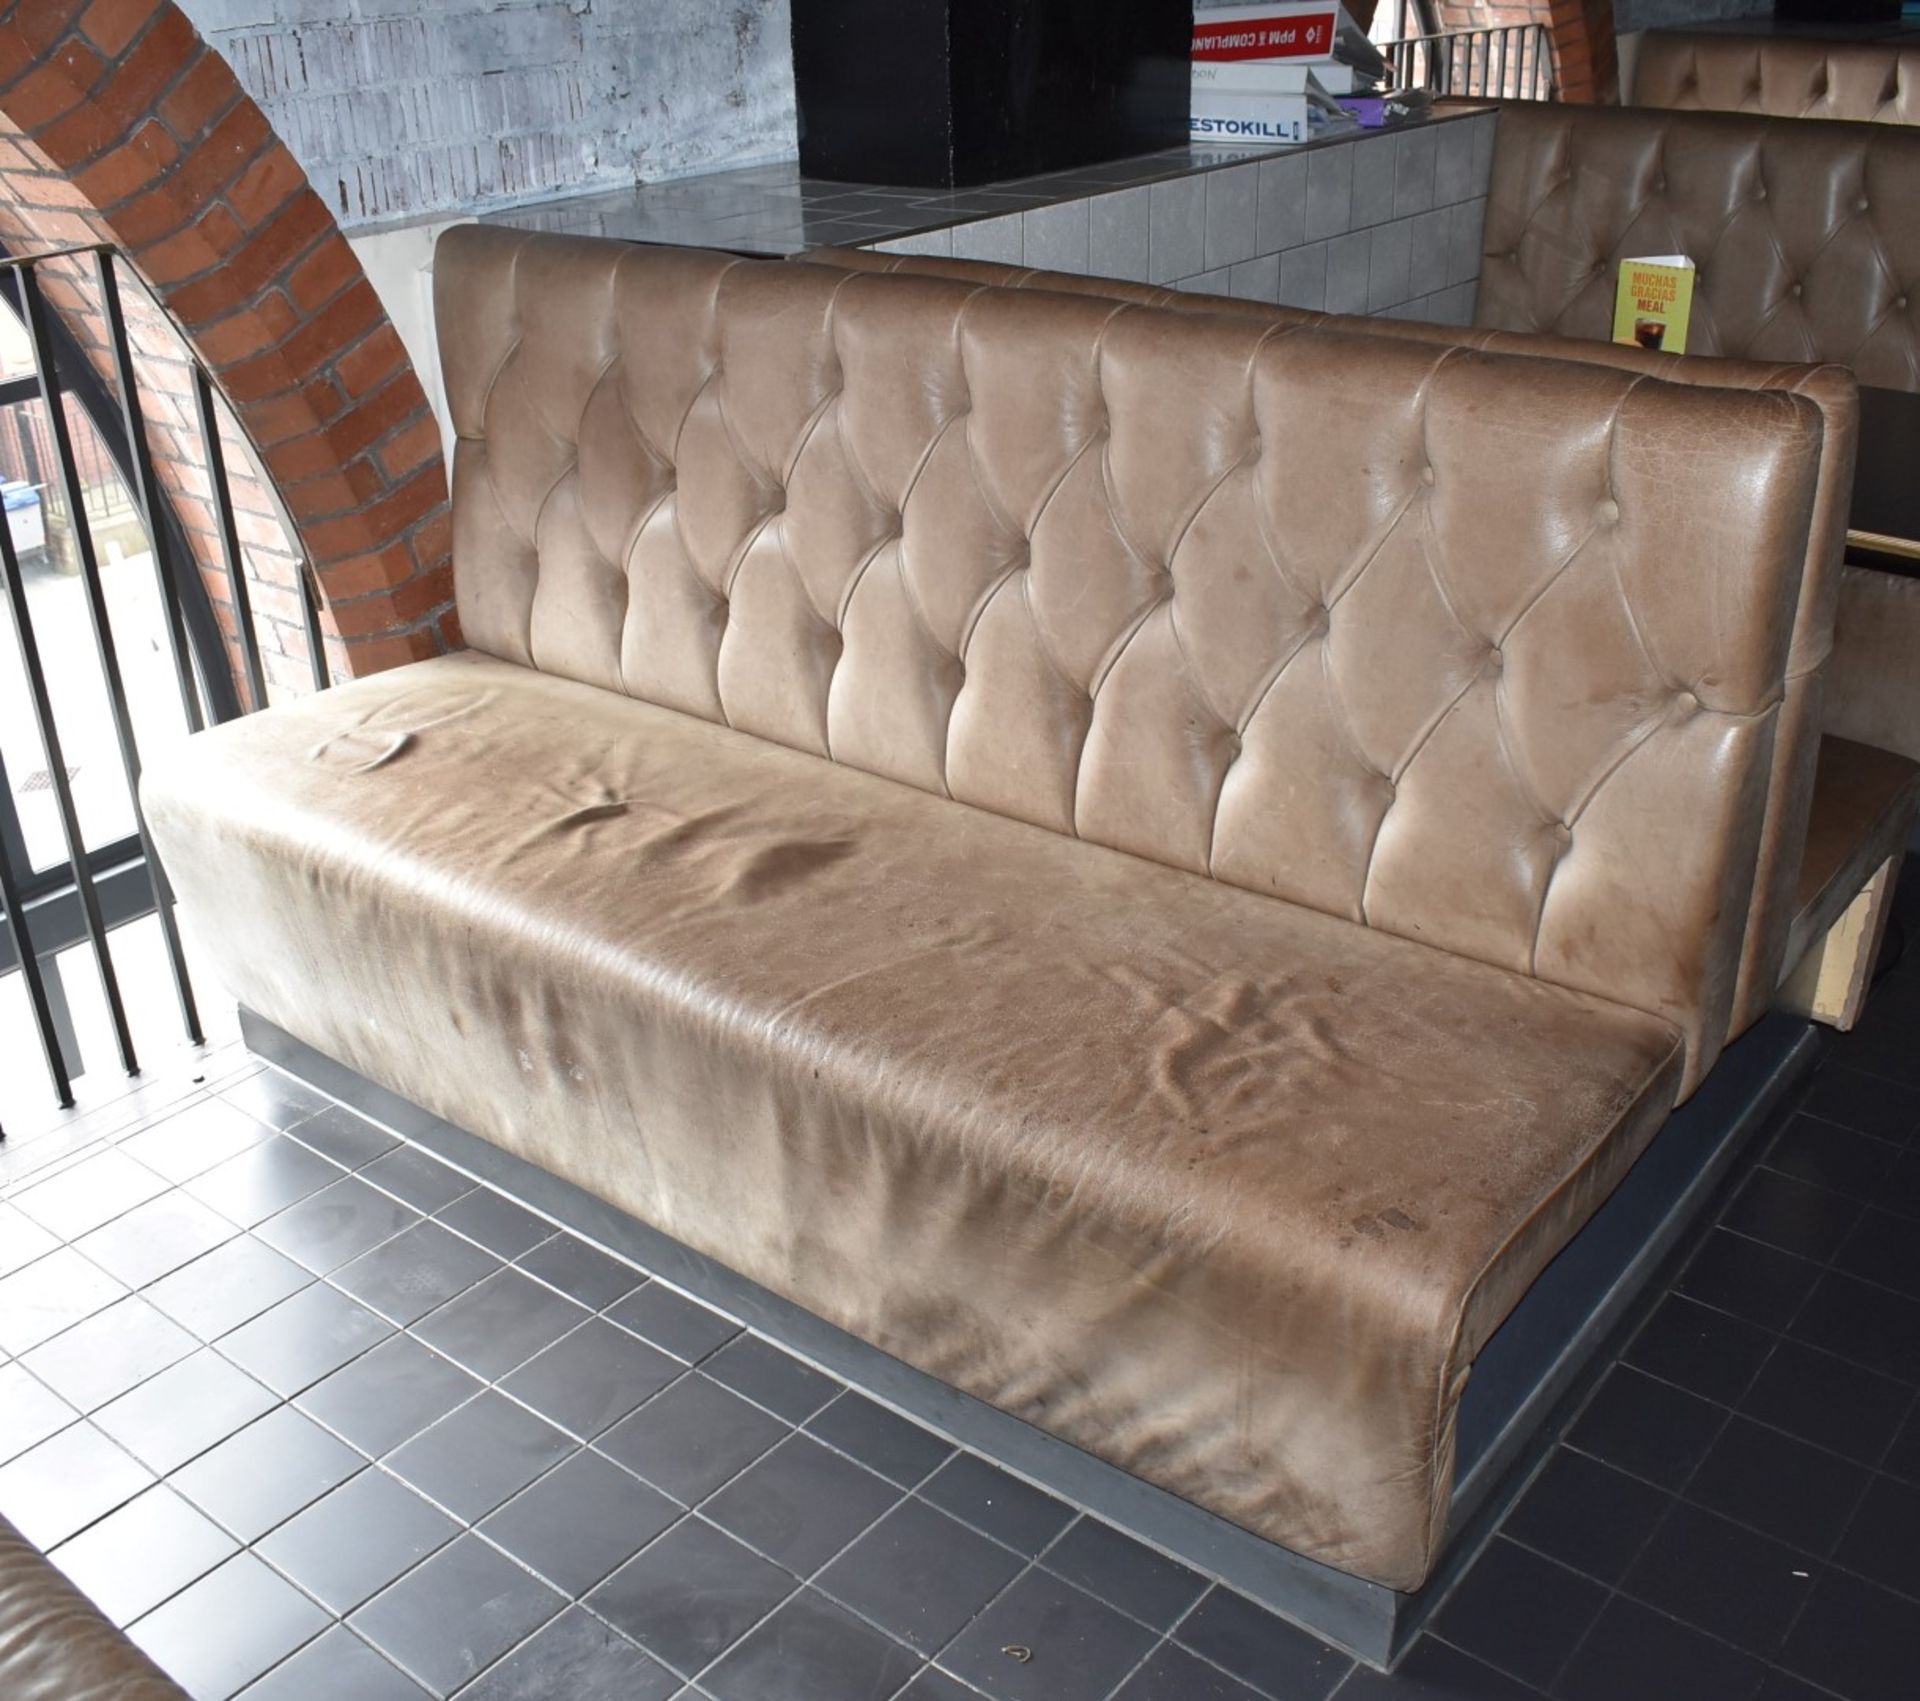 1 x Collection of Restaurant Seating Benches With Brown Leather Upholstery and Studded Backs - Image 8 of 26